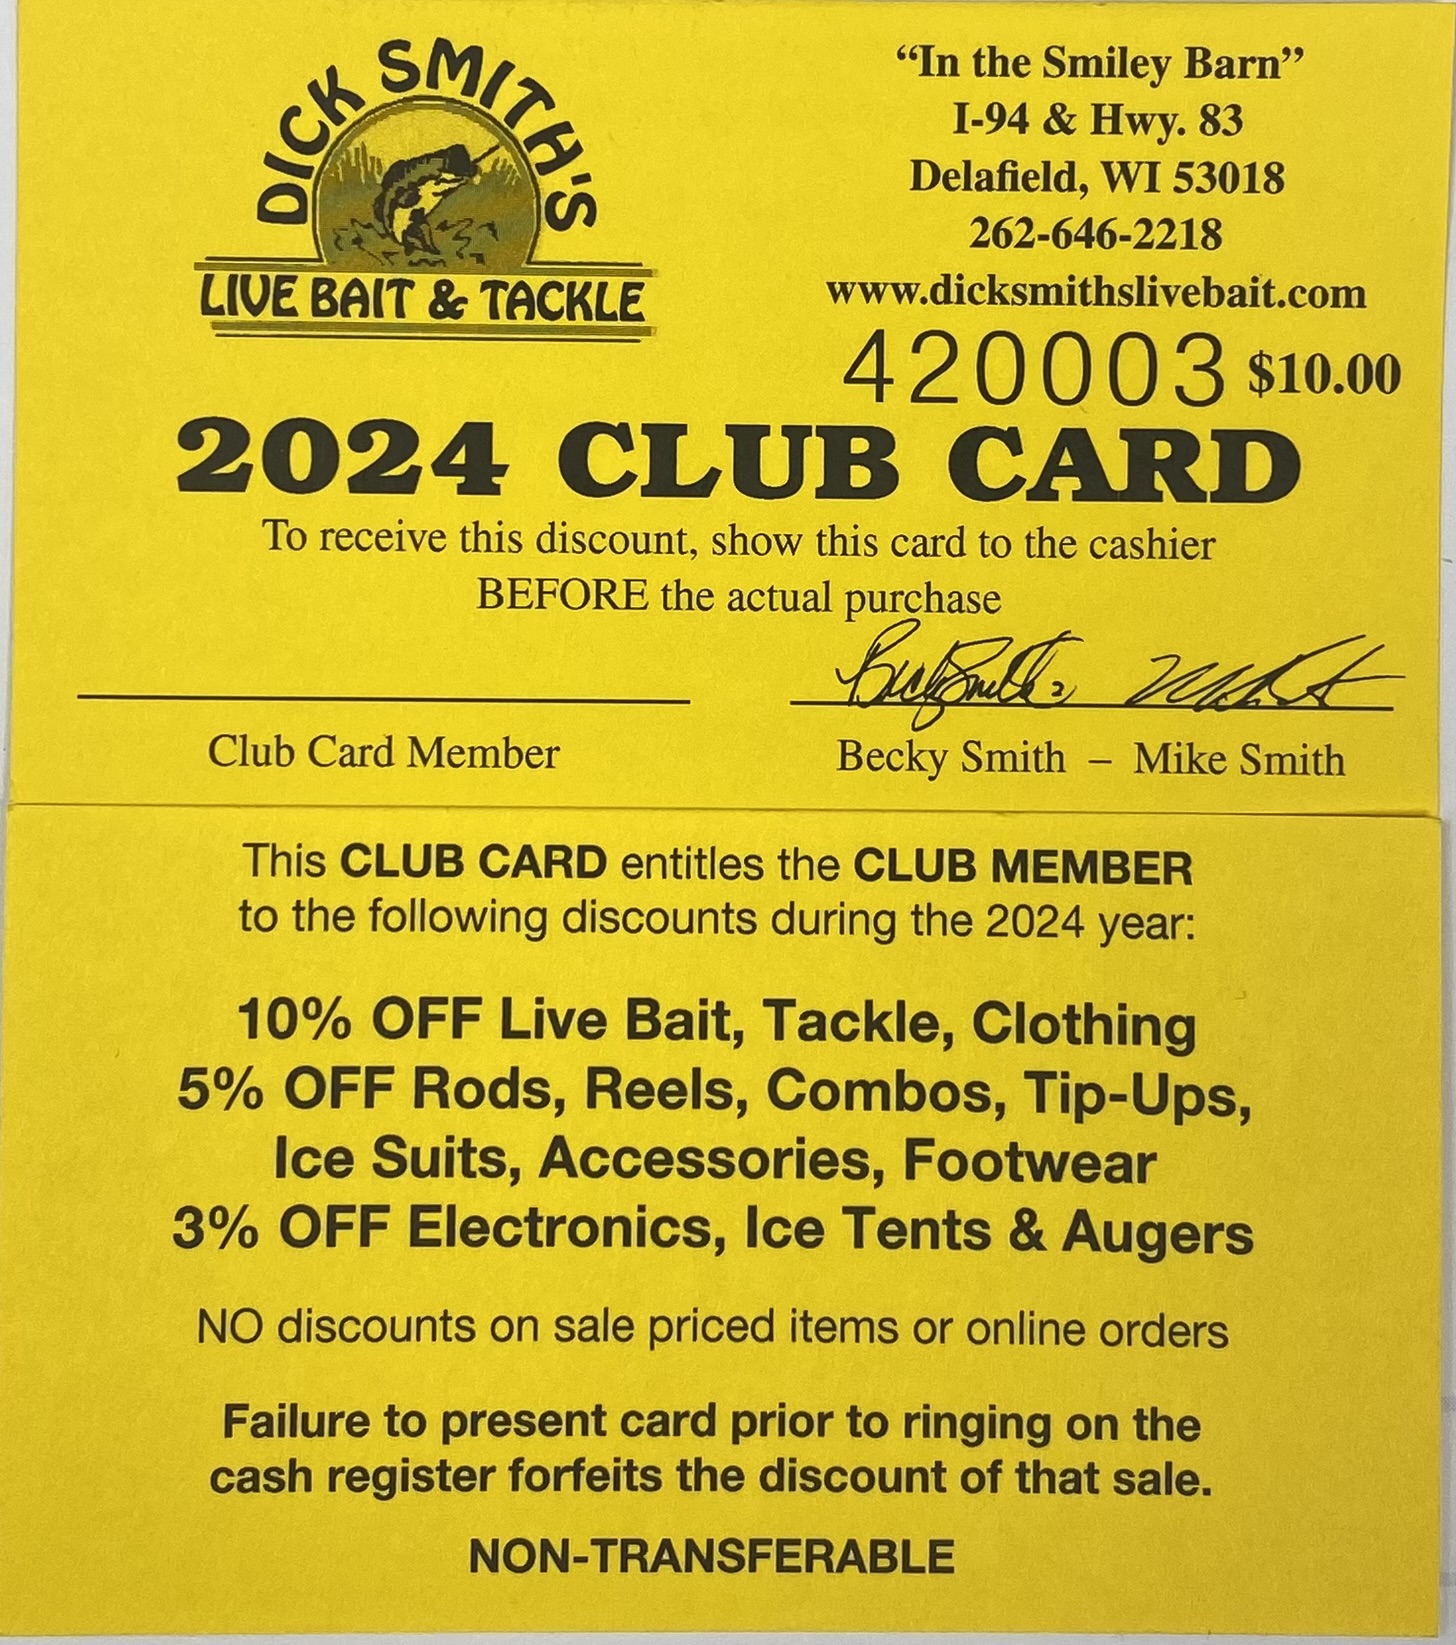 Dick Smith's 2024 Discount Club Card - Dick Smith's Live Bait & Tackle